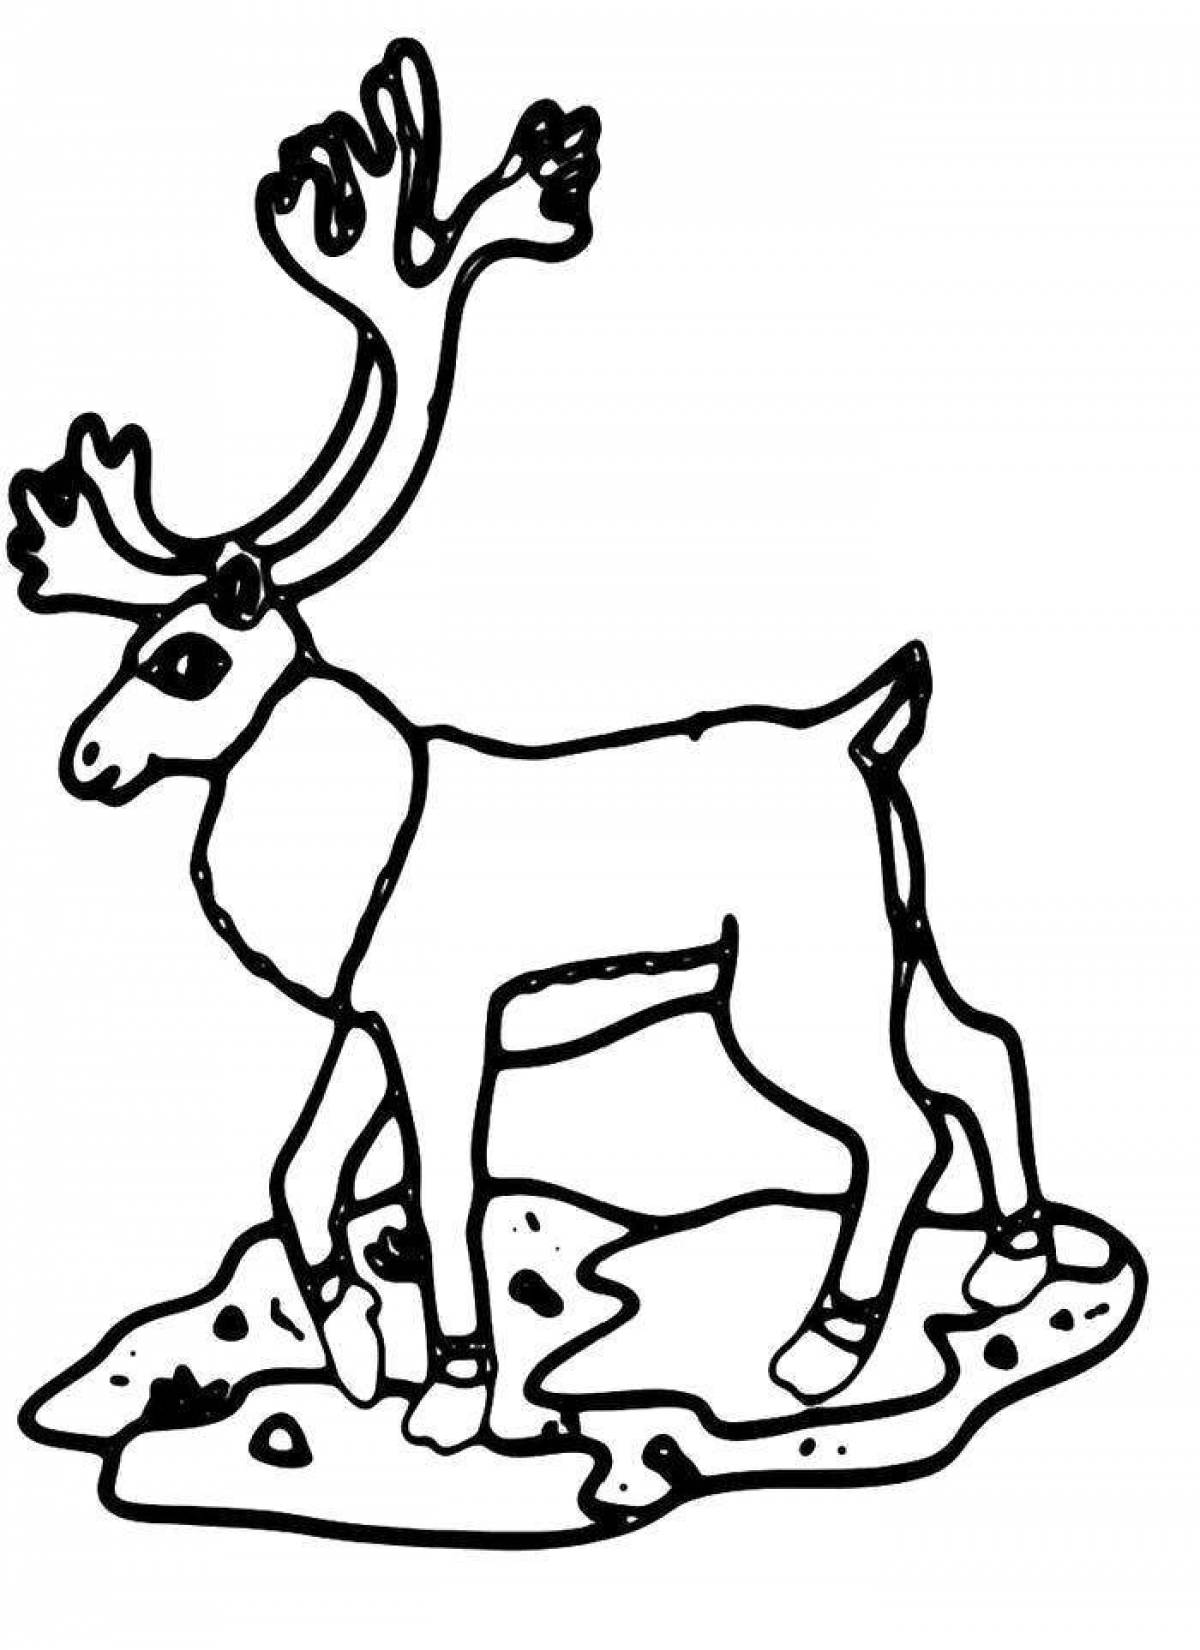 Animated deer coloring pages for kids